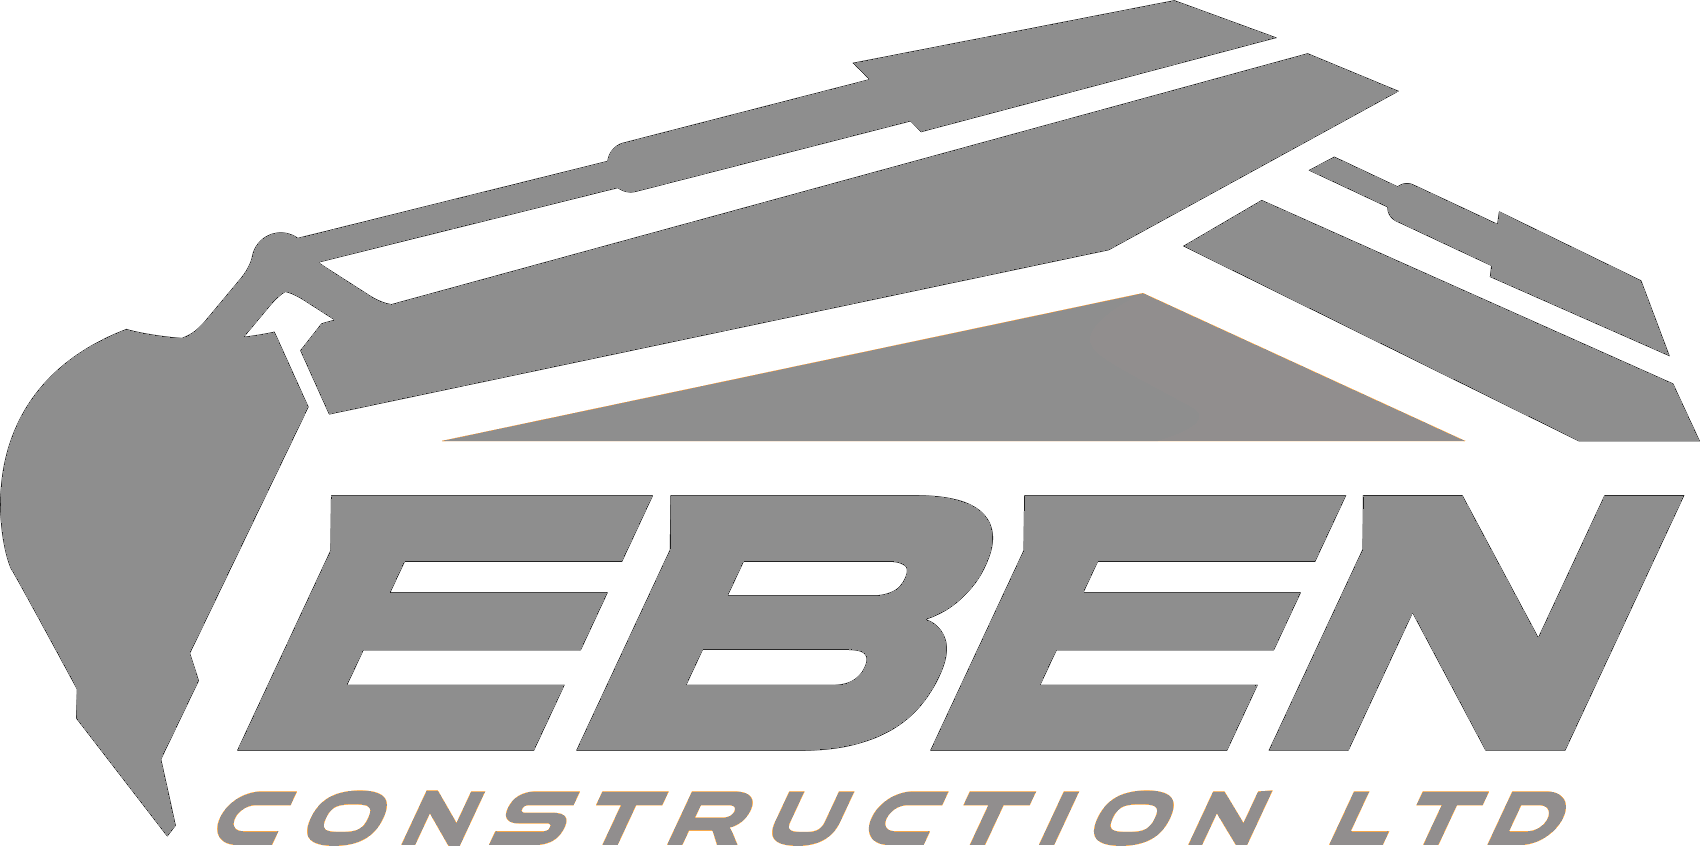 Eben Construction is a sand, gravel, and topsoil supplier and distributor for Slave Lake, AB and surrounding communities